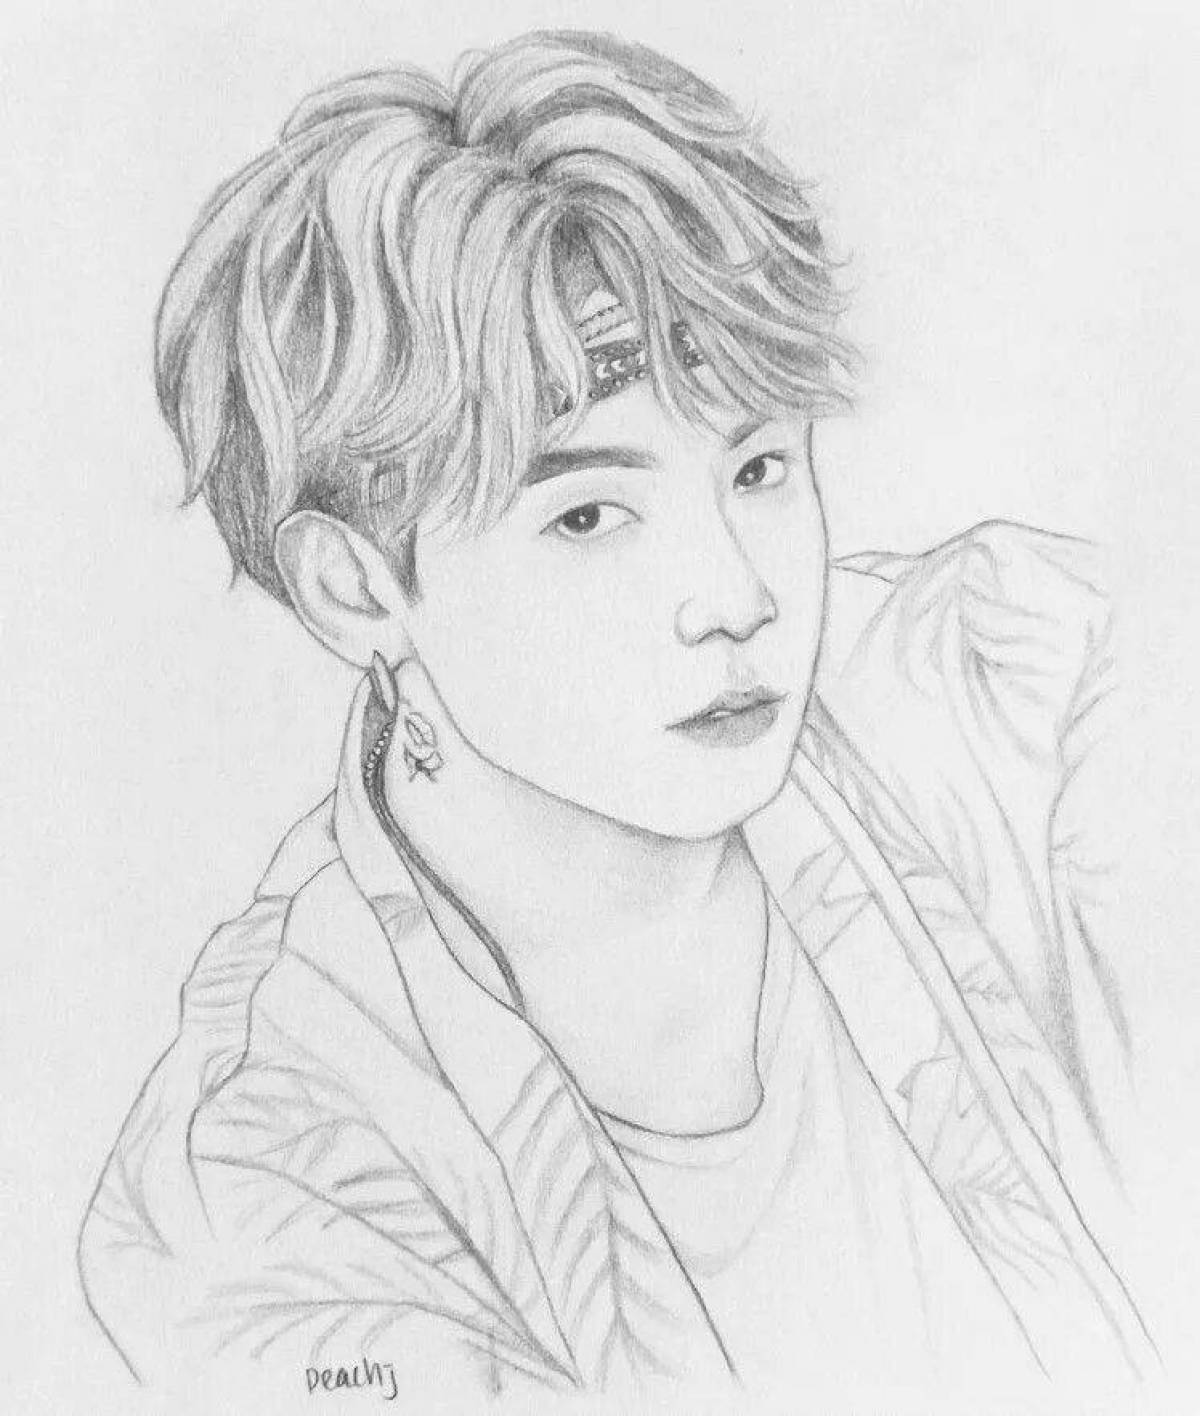 Bts jungkook animated coloring page